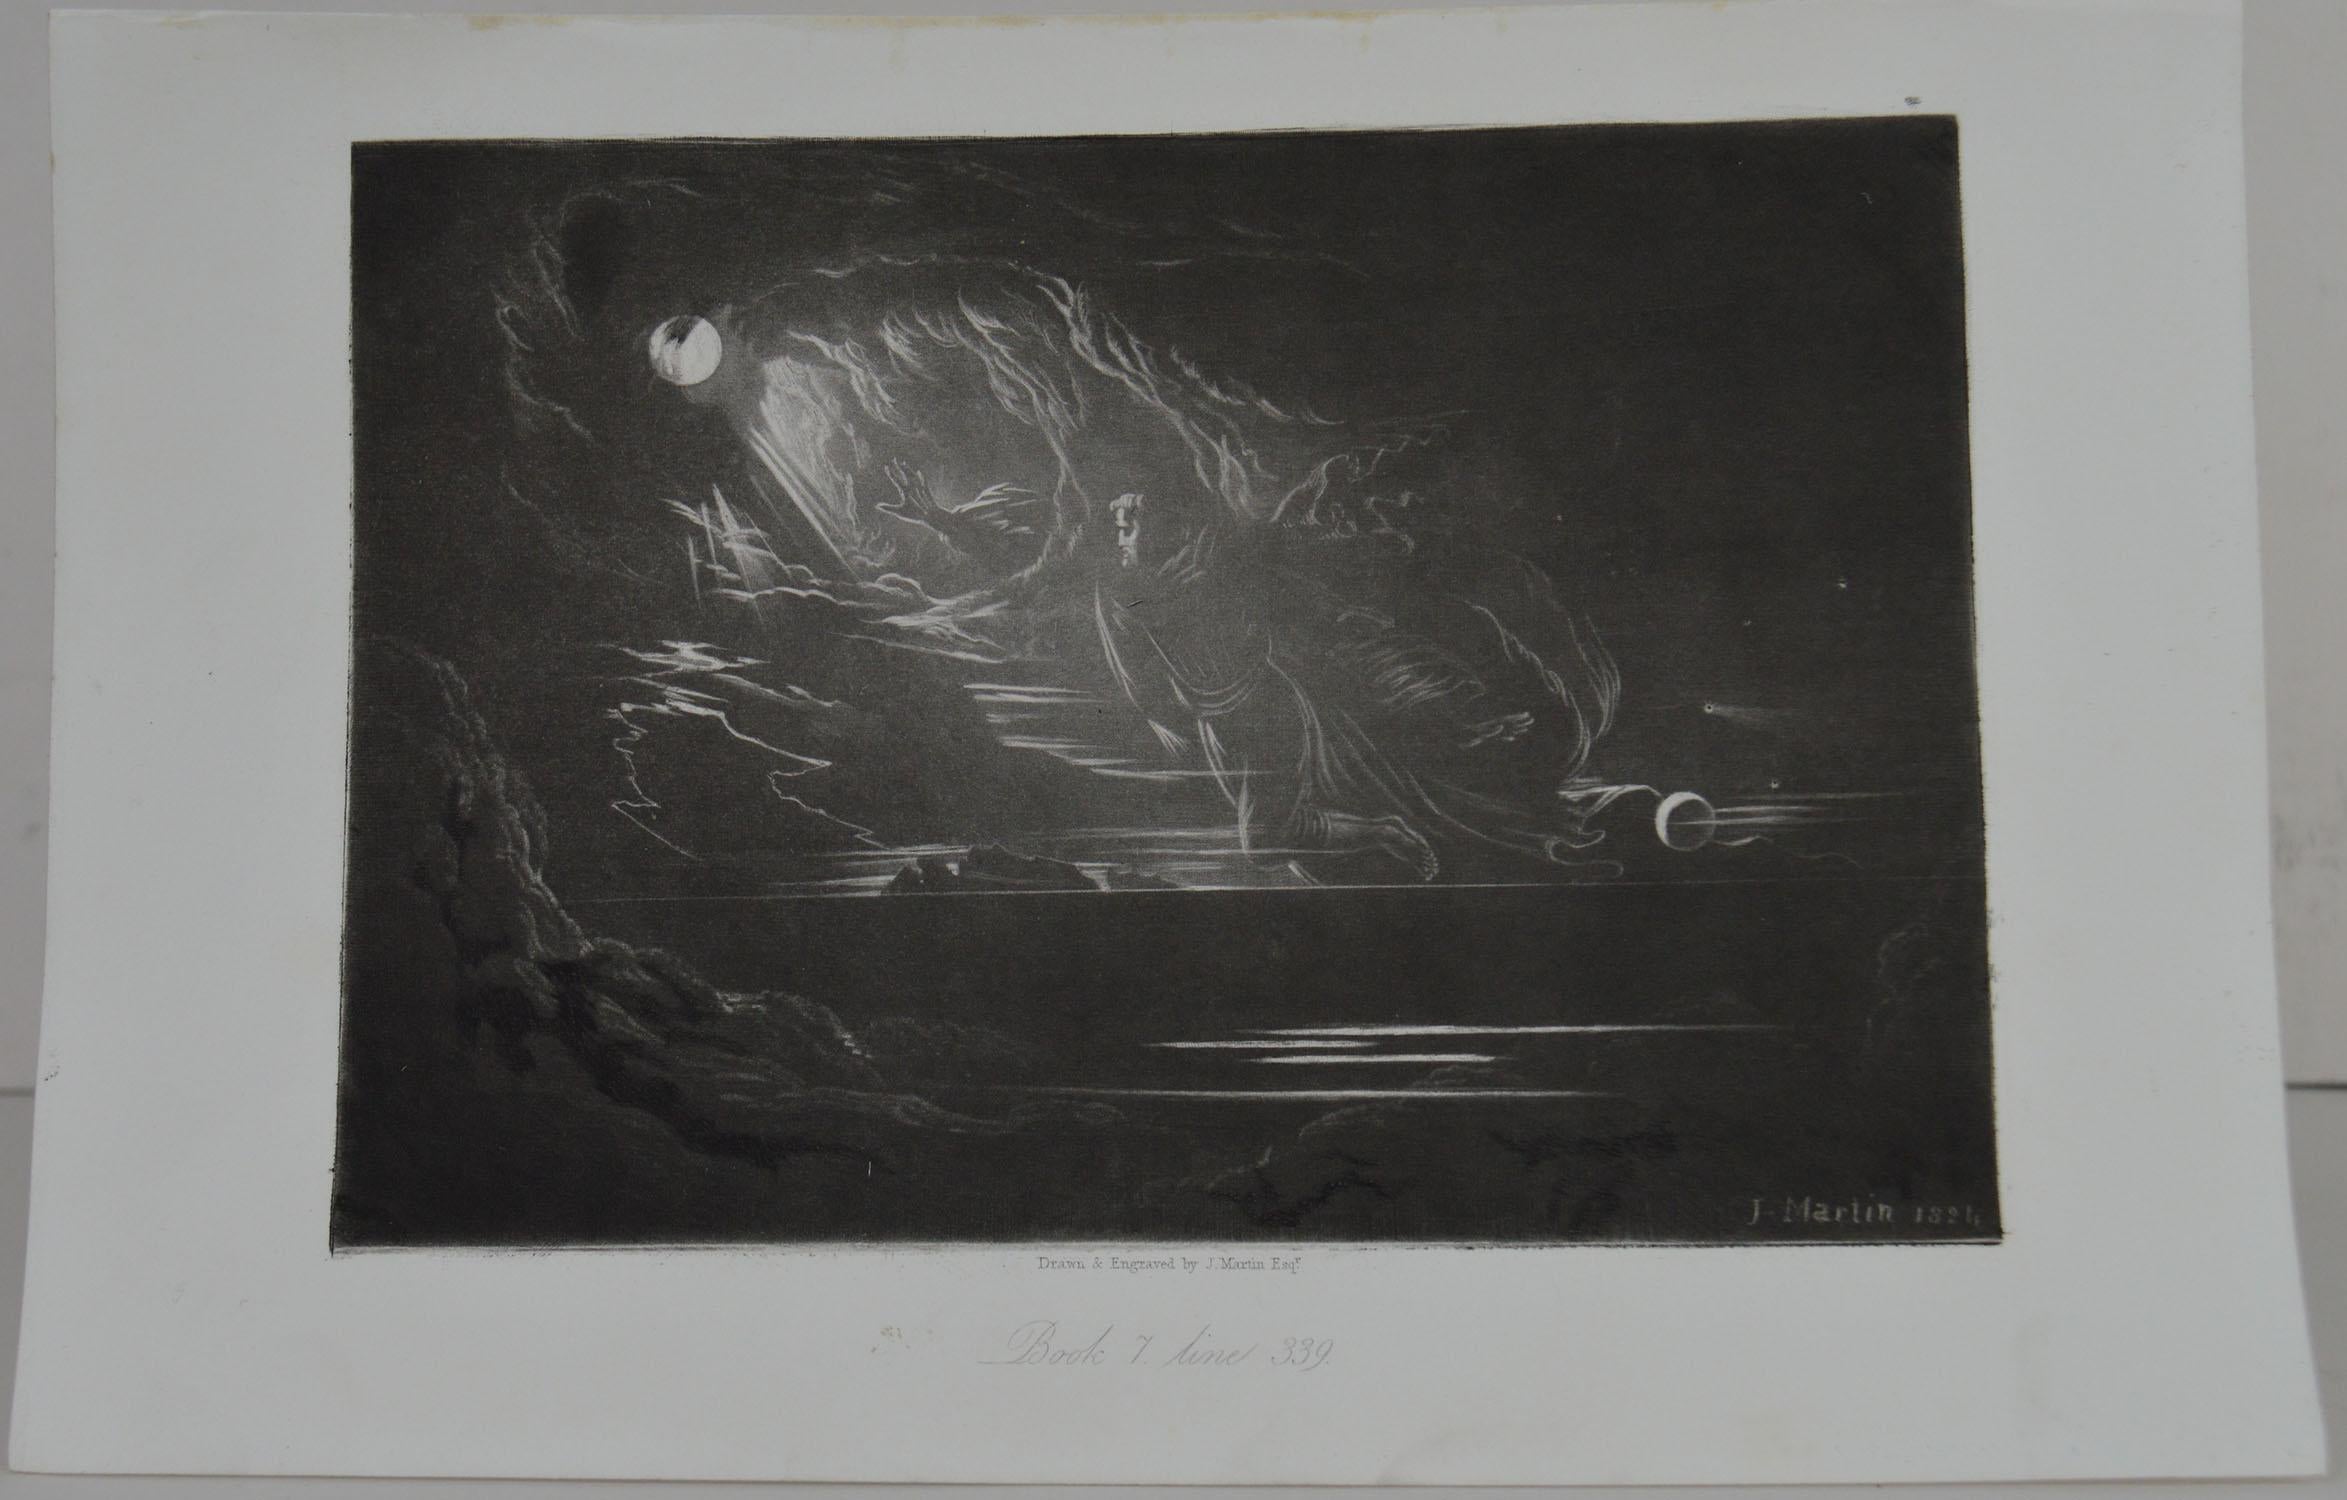 Sensational image by John Martin.

Titled: Creation of Light

Drawn and engraved by John Martin. From the highly regarded Washbourne Publication of Milton's Paradise Lost, 1853.

Unframed.

    